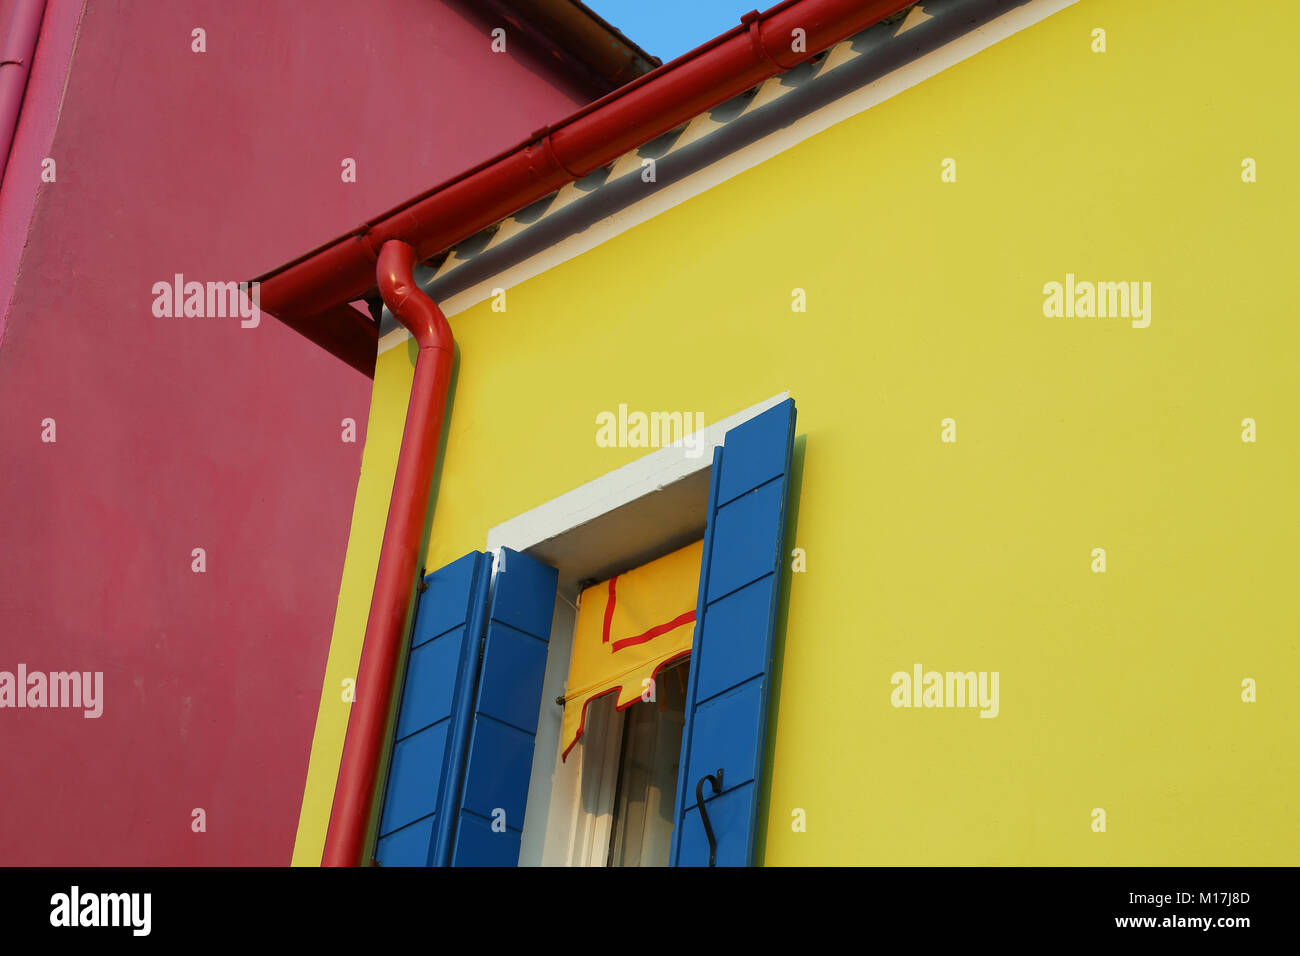 yellow house with red gutters and blue balconies in the island of Burano near Venice in Italy Stock Photo